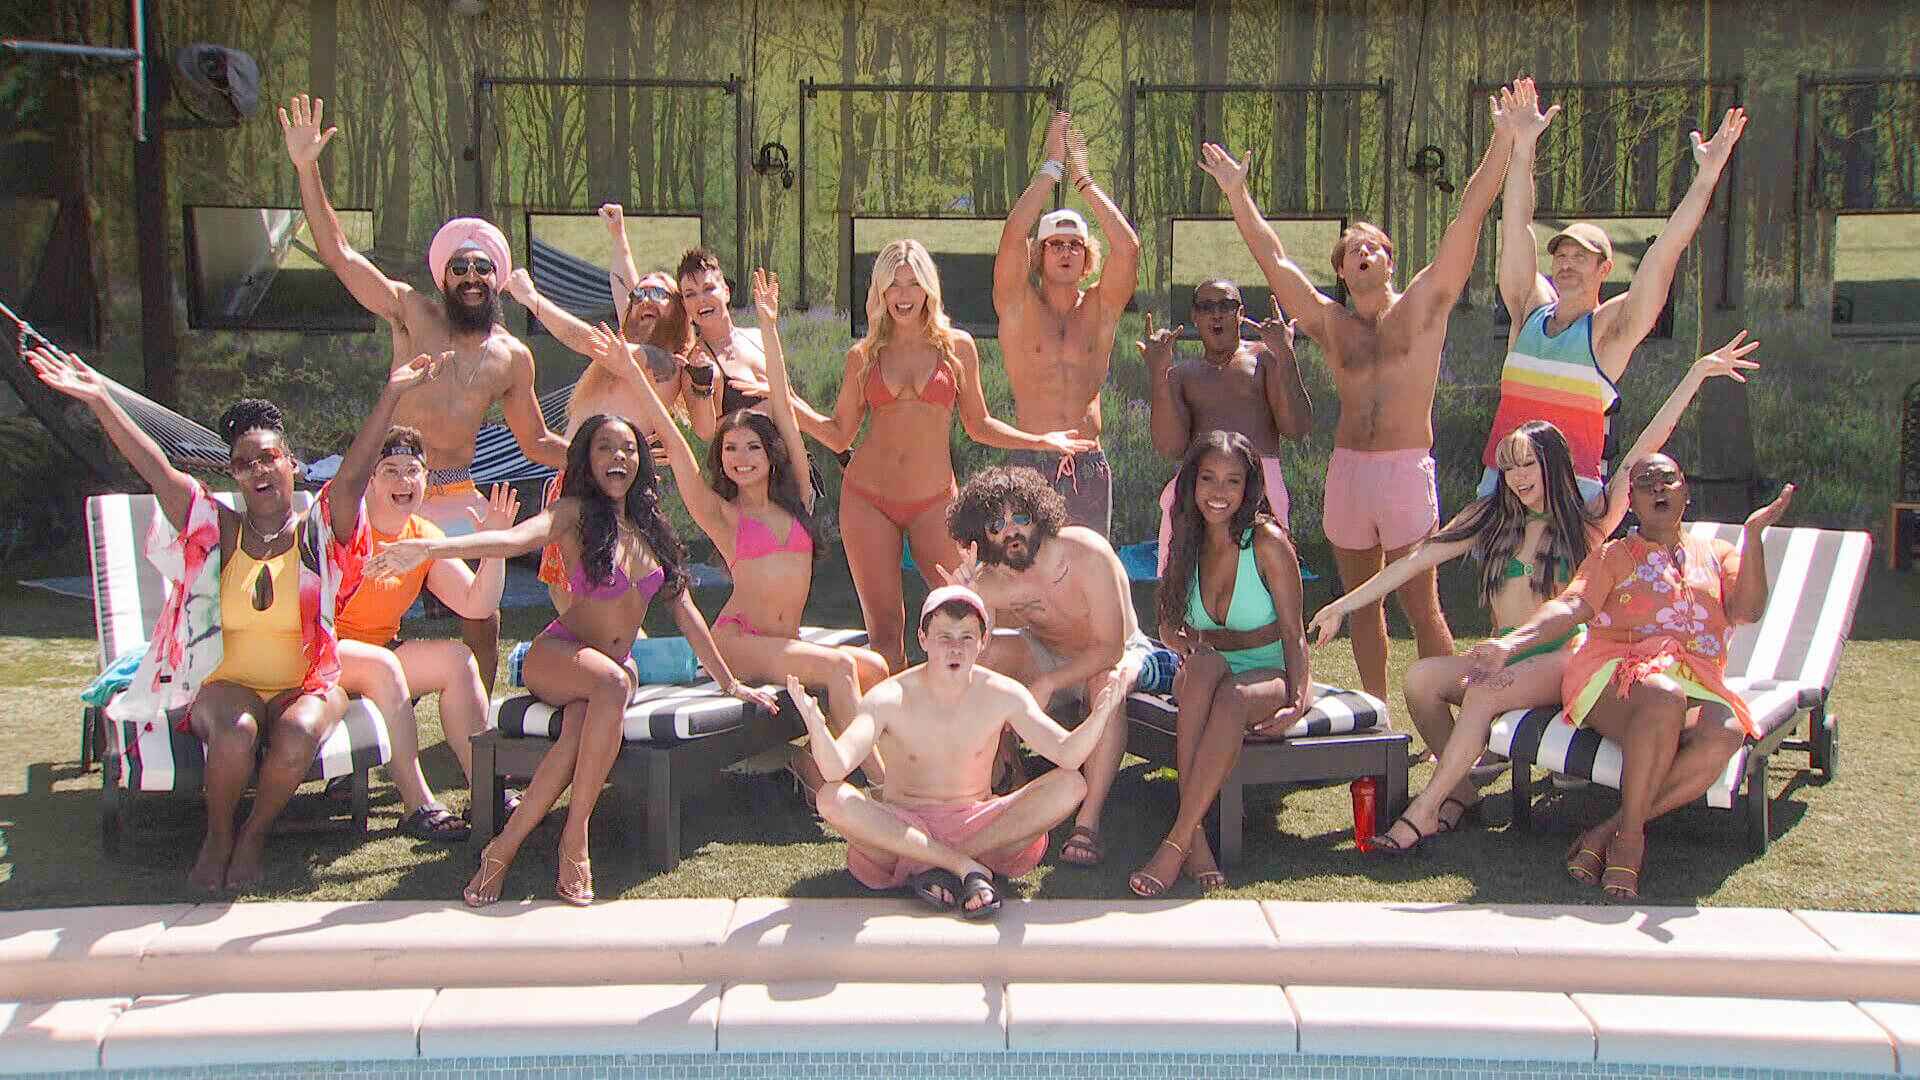 'Big Brother' Season 25 houseguests posing outside in their swimsuits with their arms up